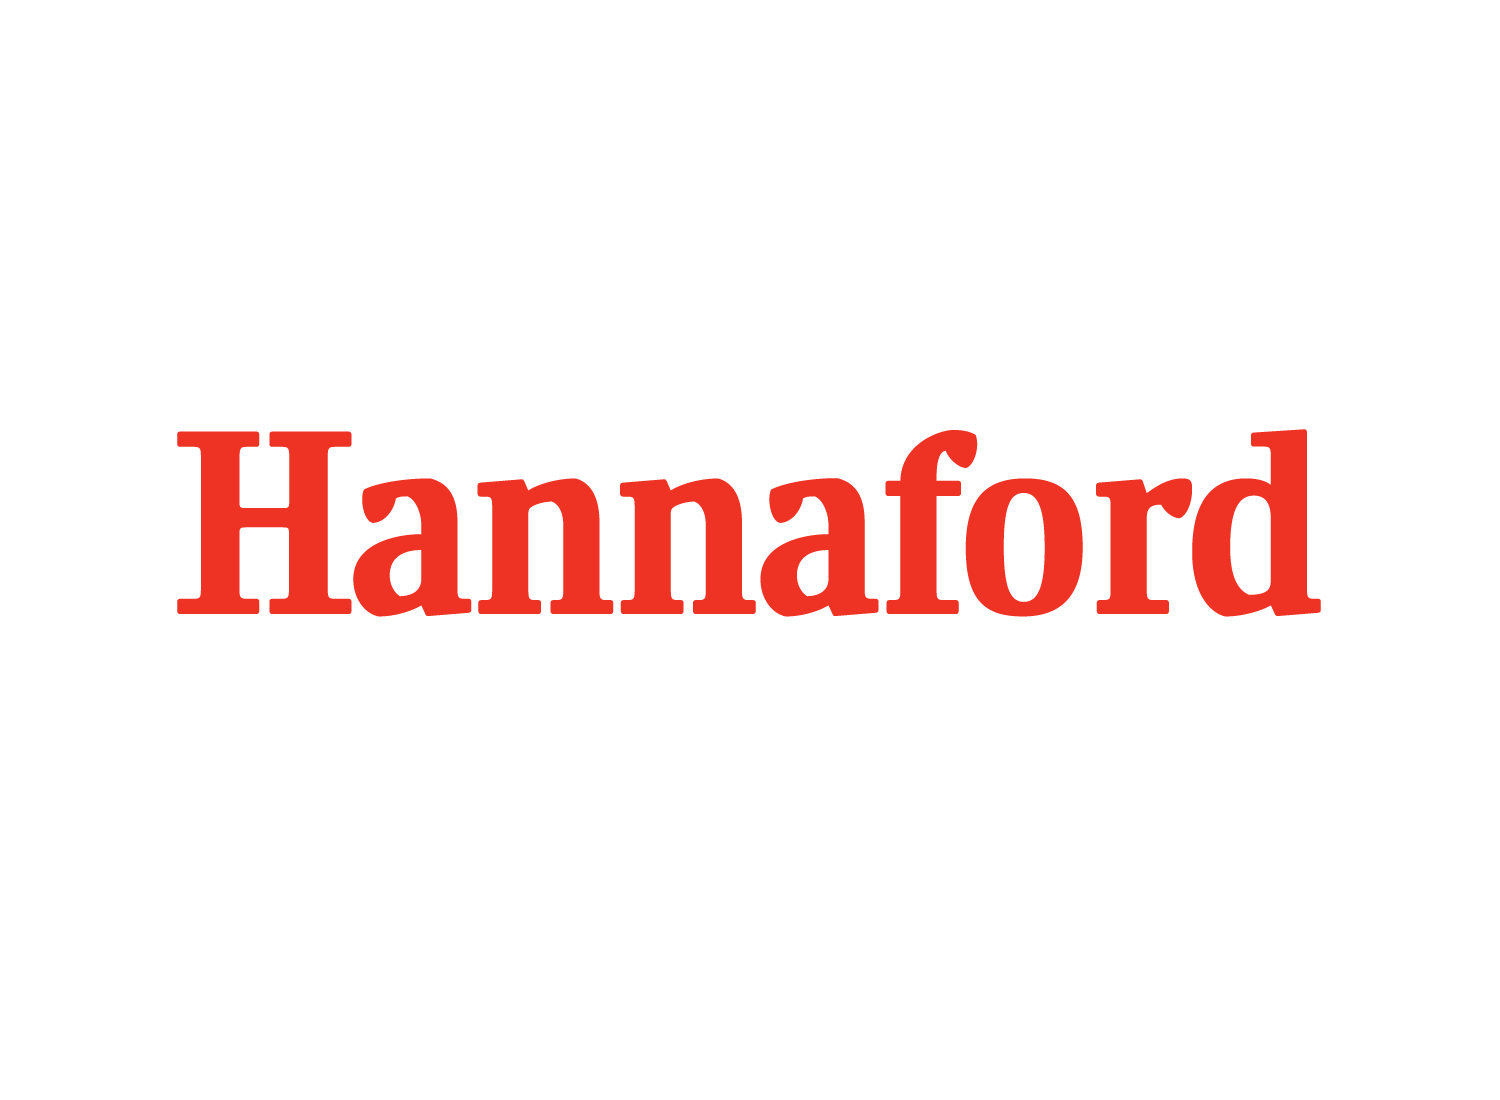 Hannaford_straight_red.png